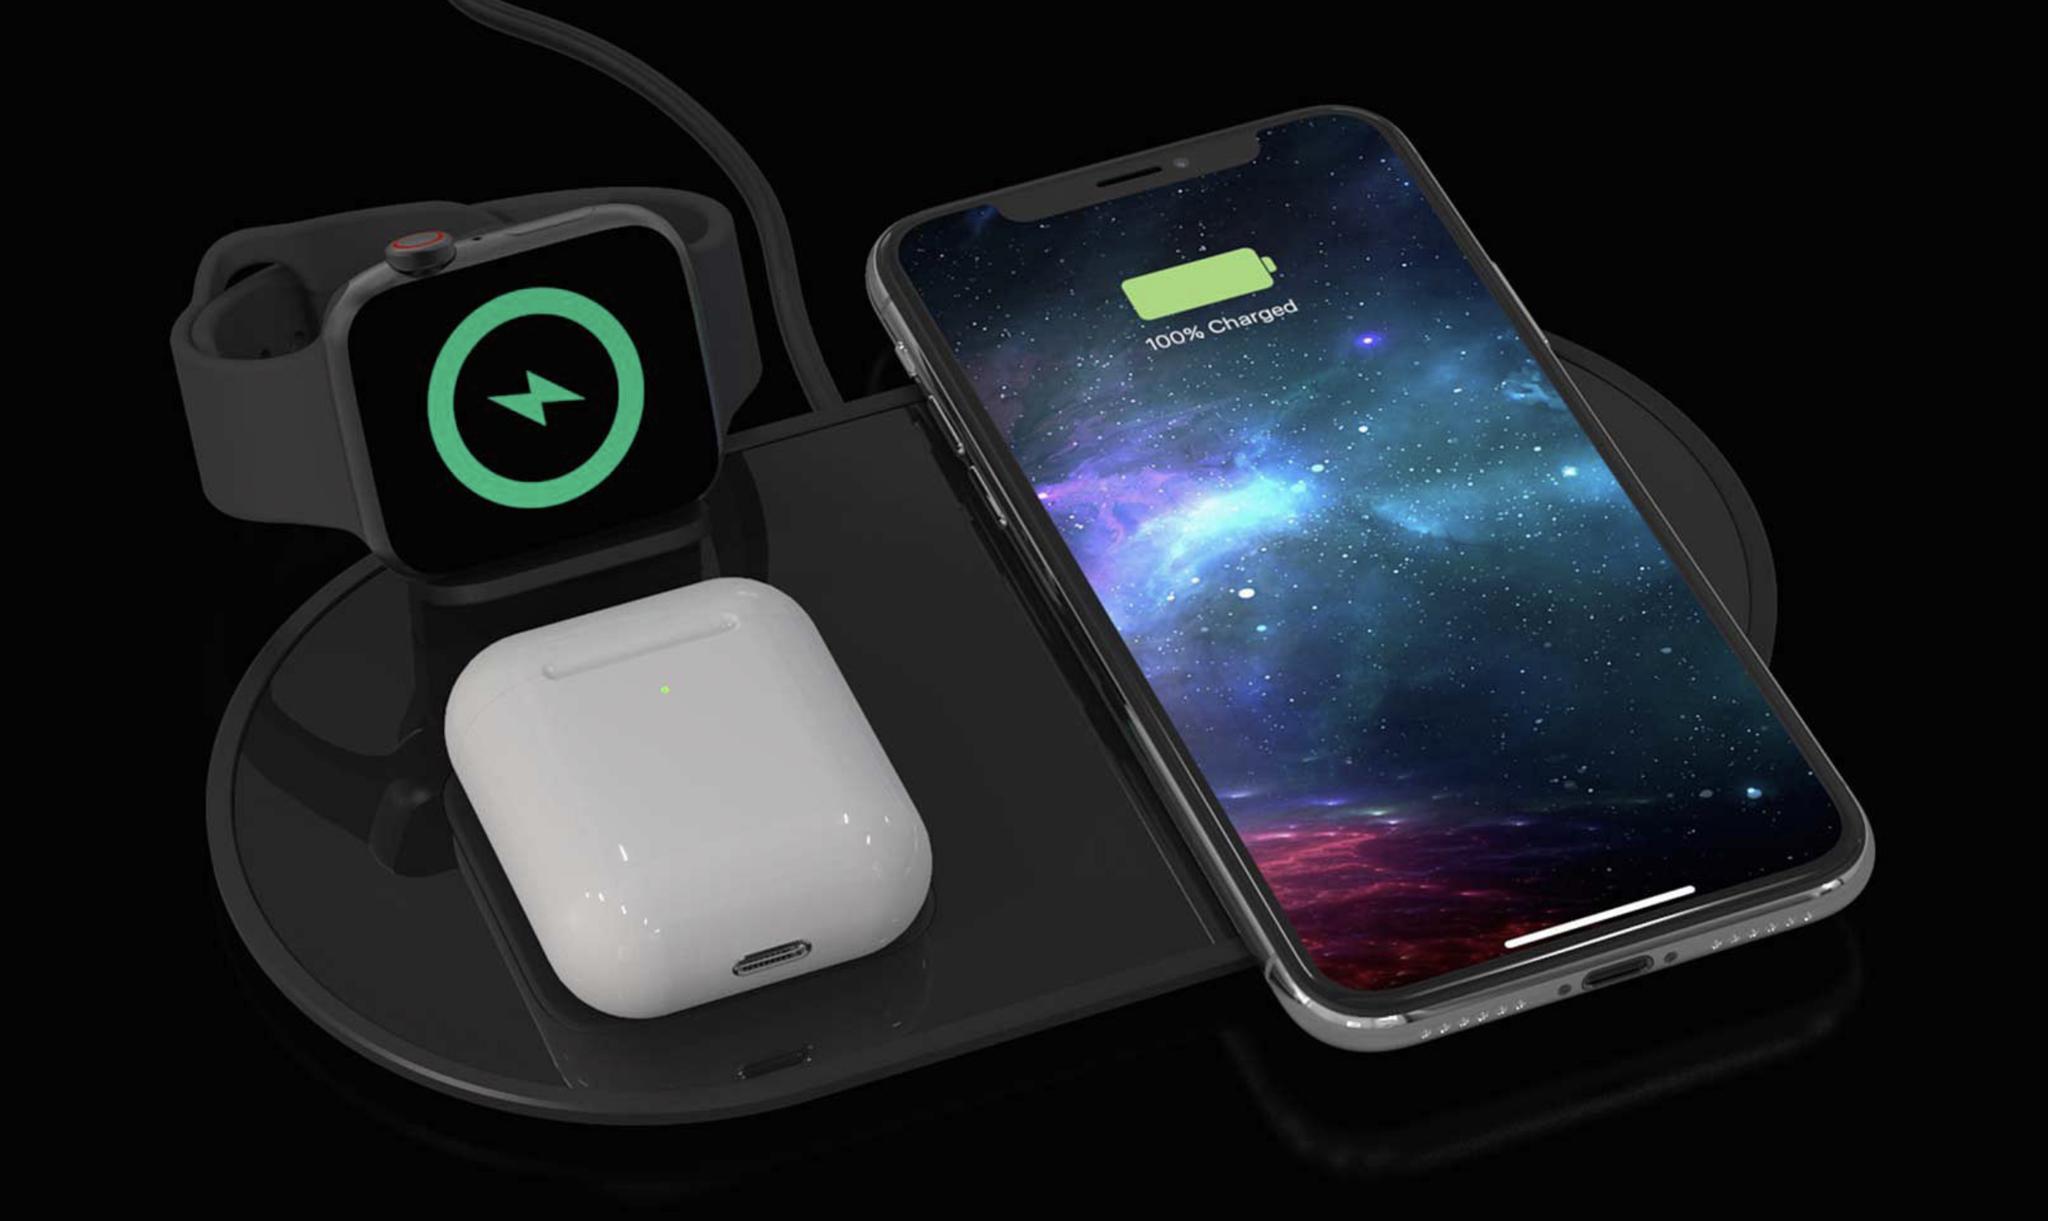 Redmi note 13 есть ли беспроводная зарядка. Wireless Charger iphone 13. Беспроводная зарядка Эппл для айфона. Huawei Wireless Charger 3 in 1. Беспроводная зарядка для iphone 11 Pro Max.